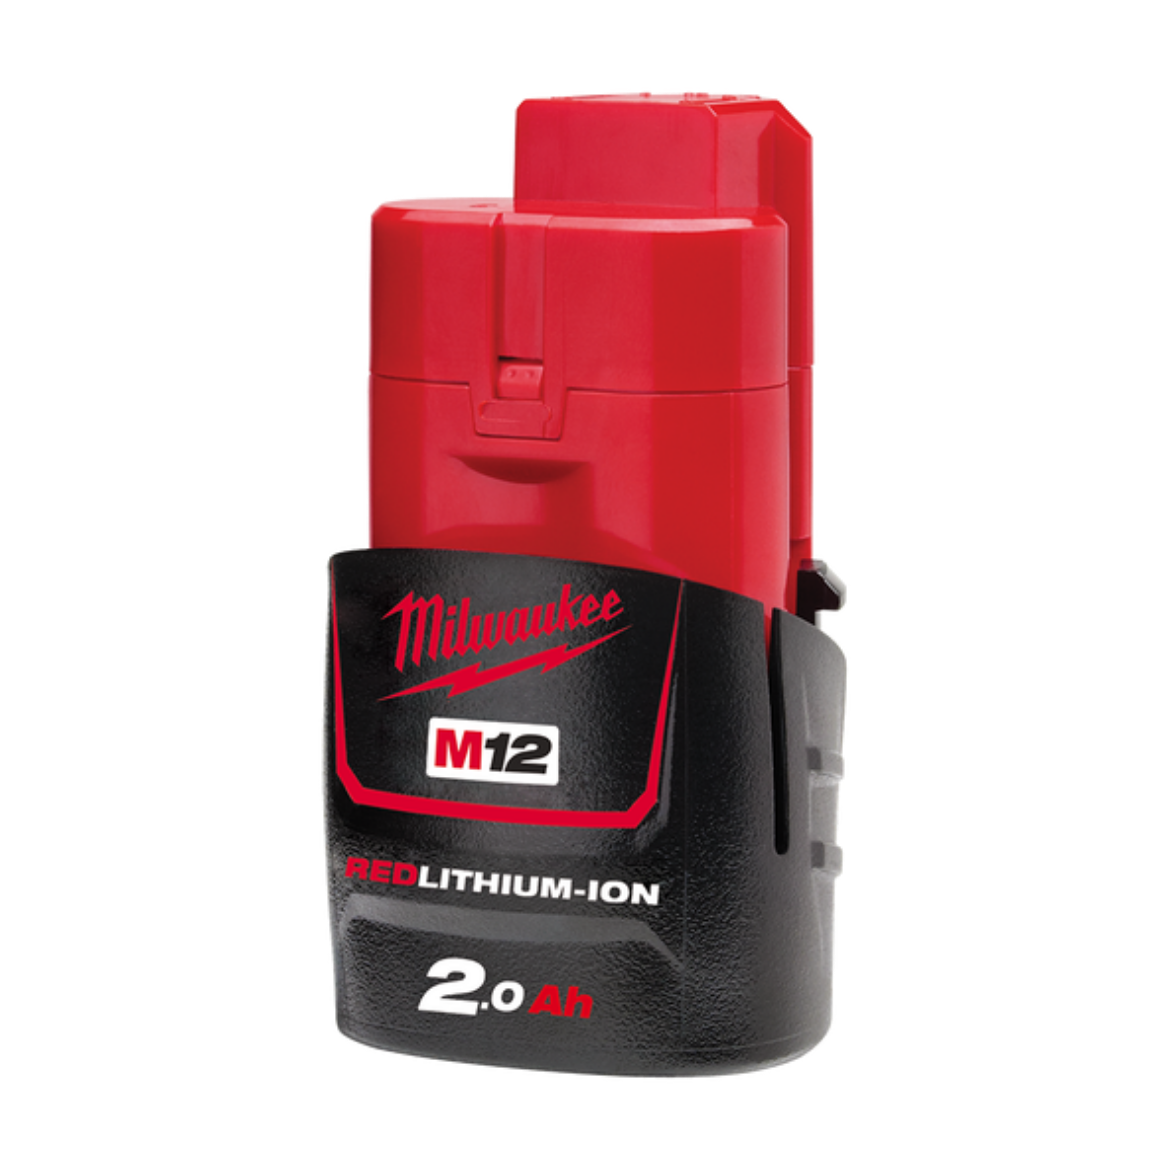 Picture of MILWAUKEE M12 BATTERY 2.0AH - CLAM SHELL